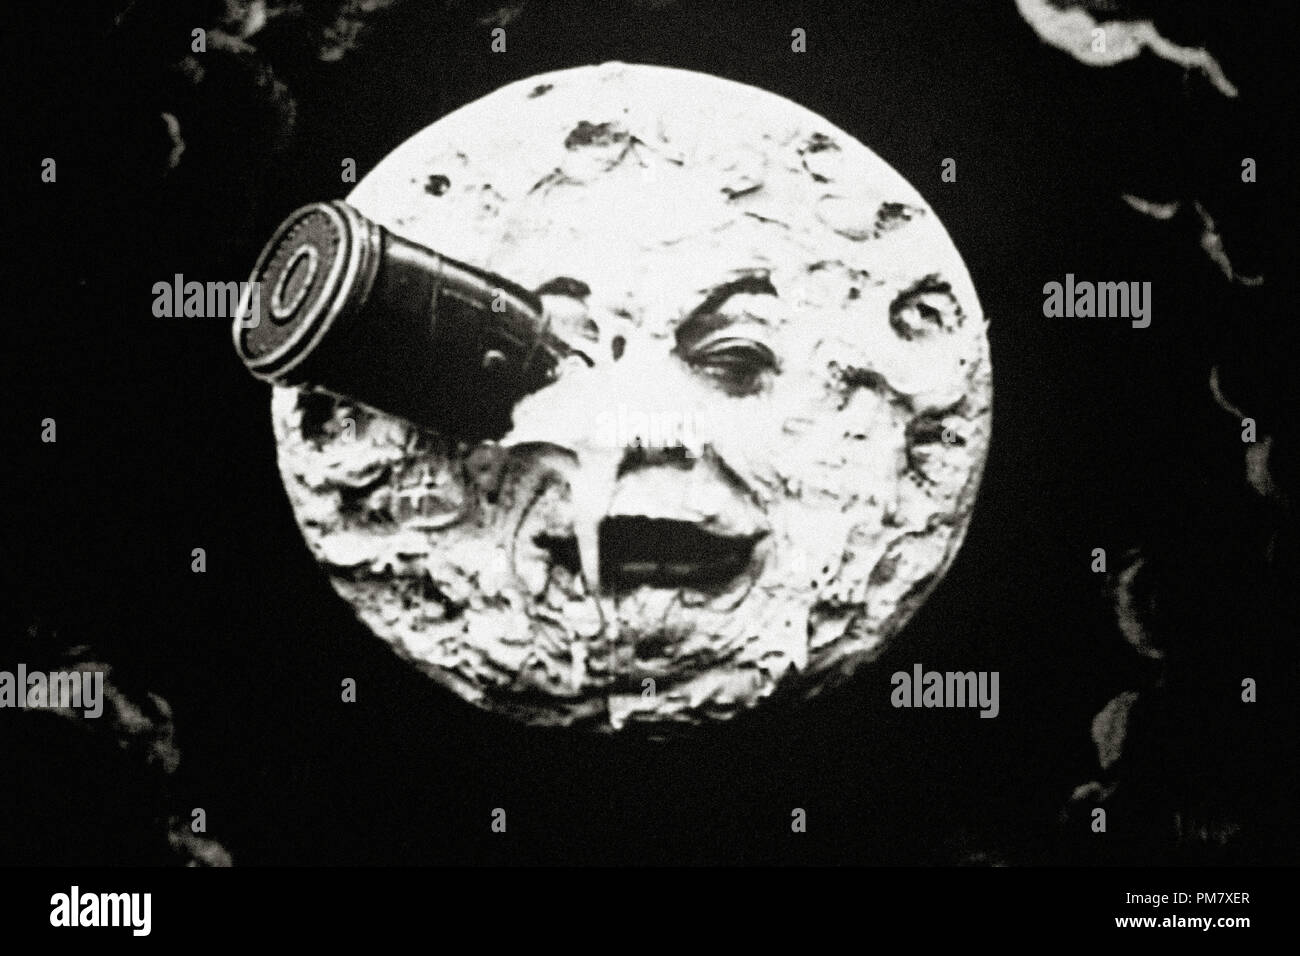 'A Trip to the Moon' 1902 Scene Still File Reference # 31537 704 Stock Photo